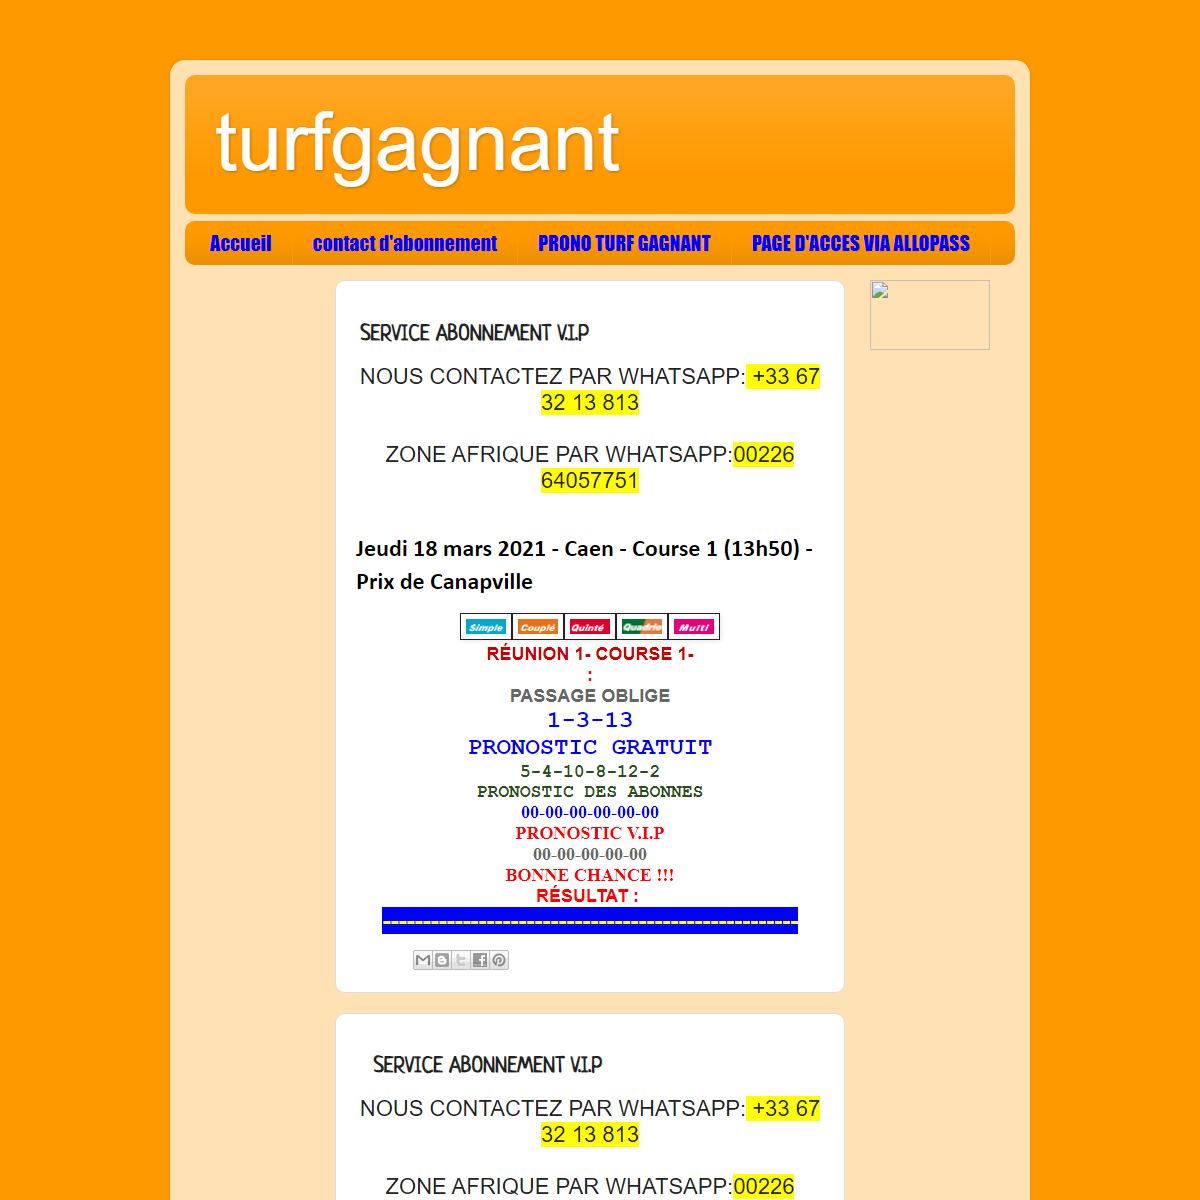 A complete backup of https://turfgagnant1.blogspot.com/